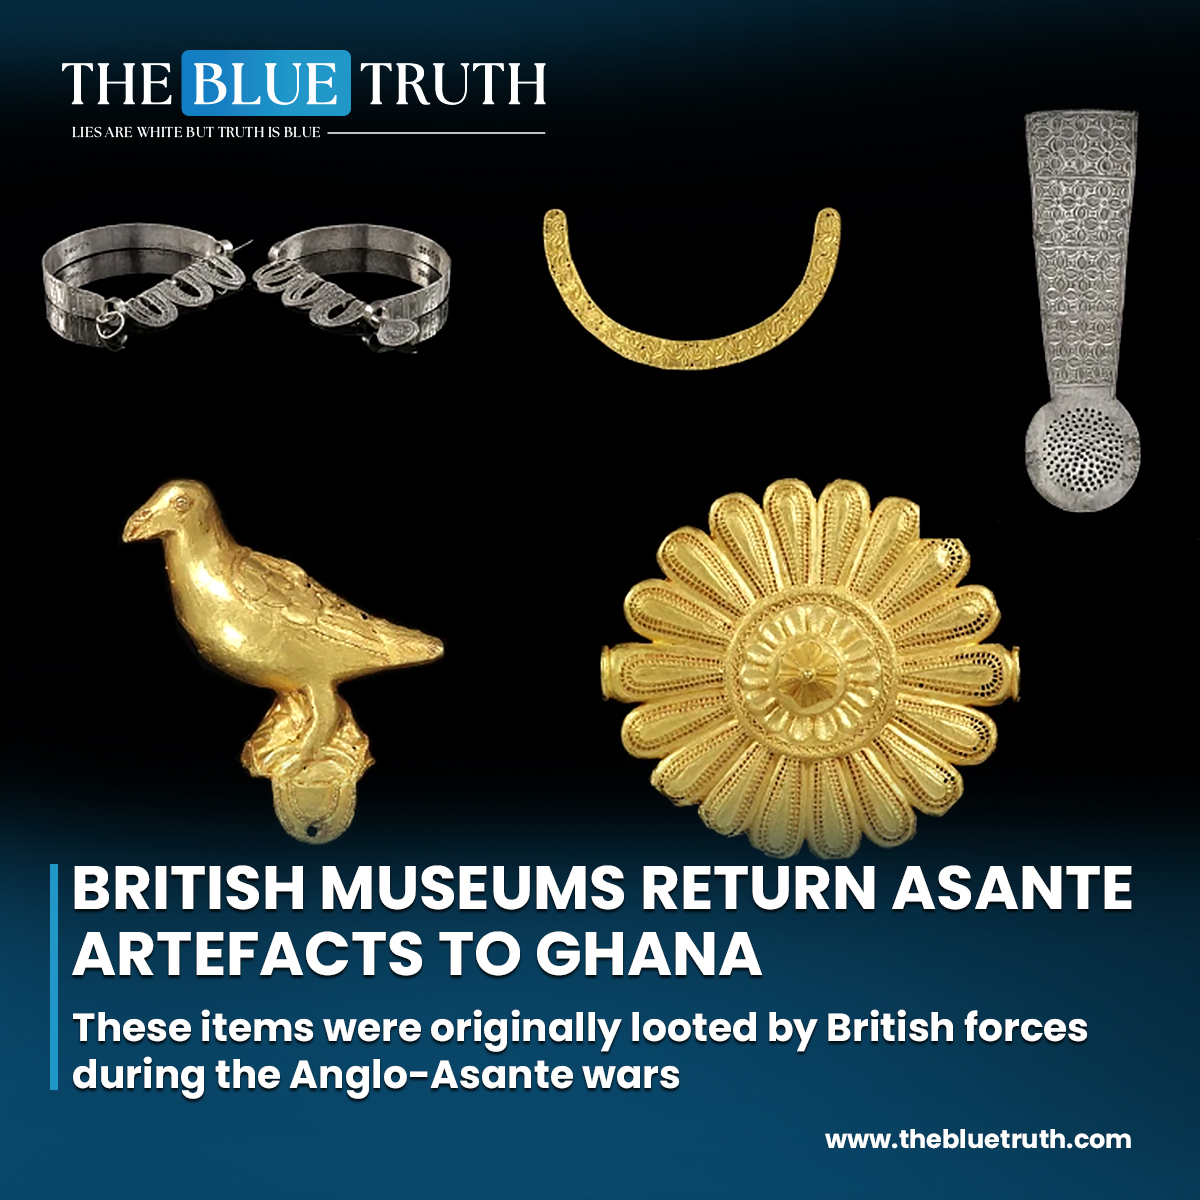 In a historic move, two British museums are returning gold and silver artefacts to Ghana after a loan agreement spanning 150 years.
#BritishMuseums #GhanaArtifacts #HistoricReturn #CulturalHeritage #ArtRestitution #ColonialLegacy #tbt #thebluetruth